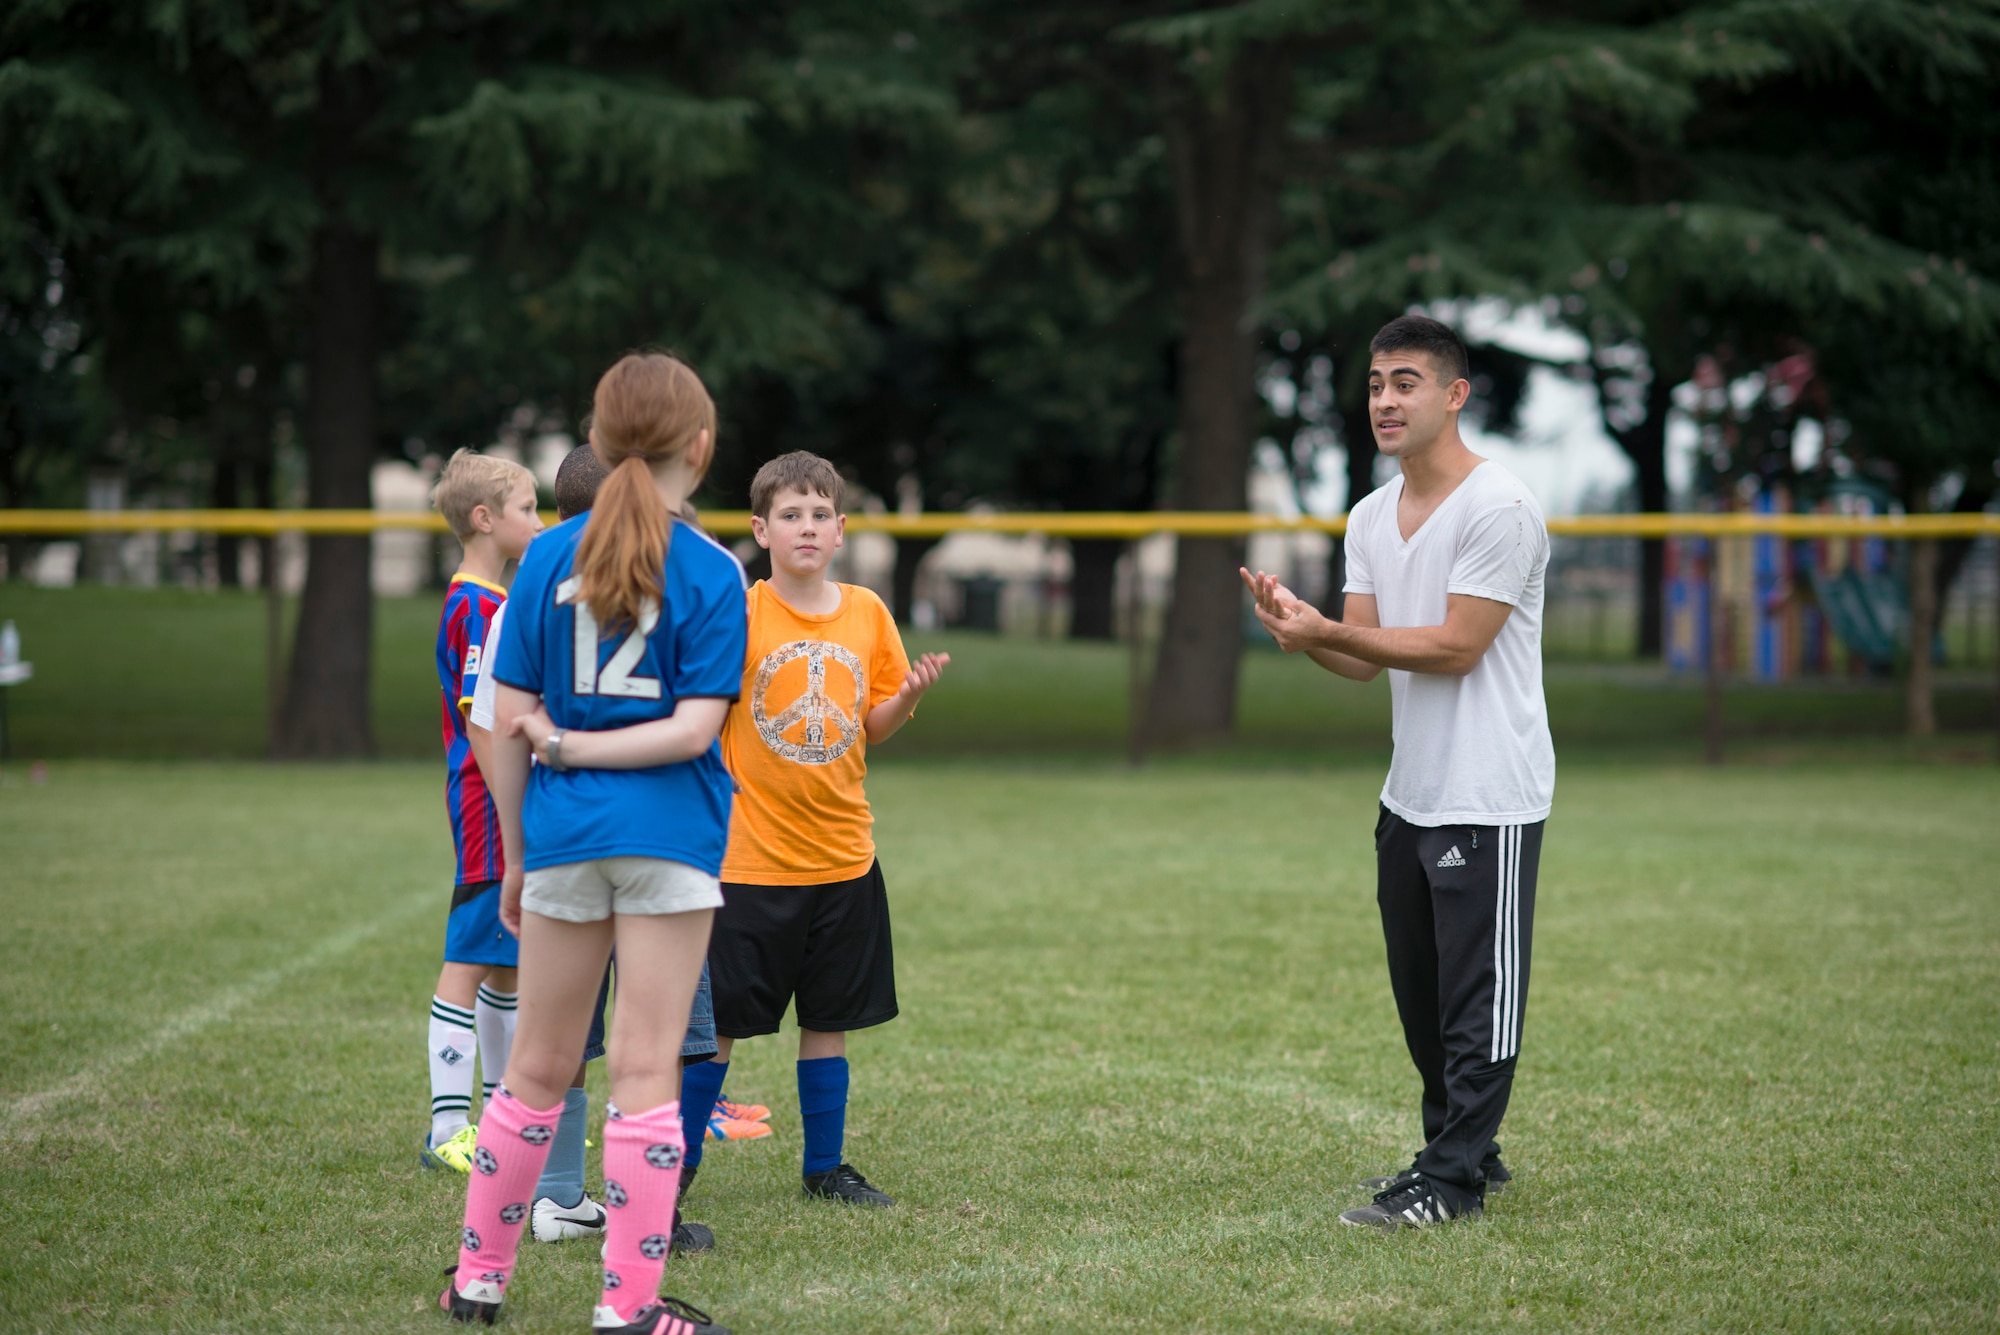 Airman 1st Class Tomasz Barba, volunteer soccer coach, discusses the importance of communication with youth soccer participants at Yokota Air Base, Japan, Sept. 15, 2015. Barba, a rookie coach, asked his players to help him out by providing any input they had regarding his style. (U.S. Air Force photo by Airman 1st Class Delano Scott/Released)